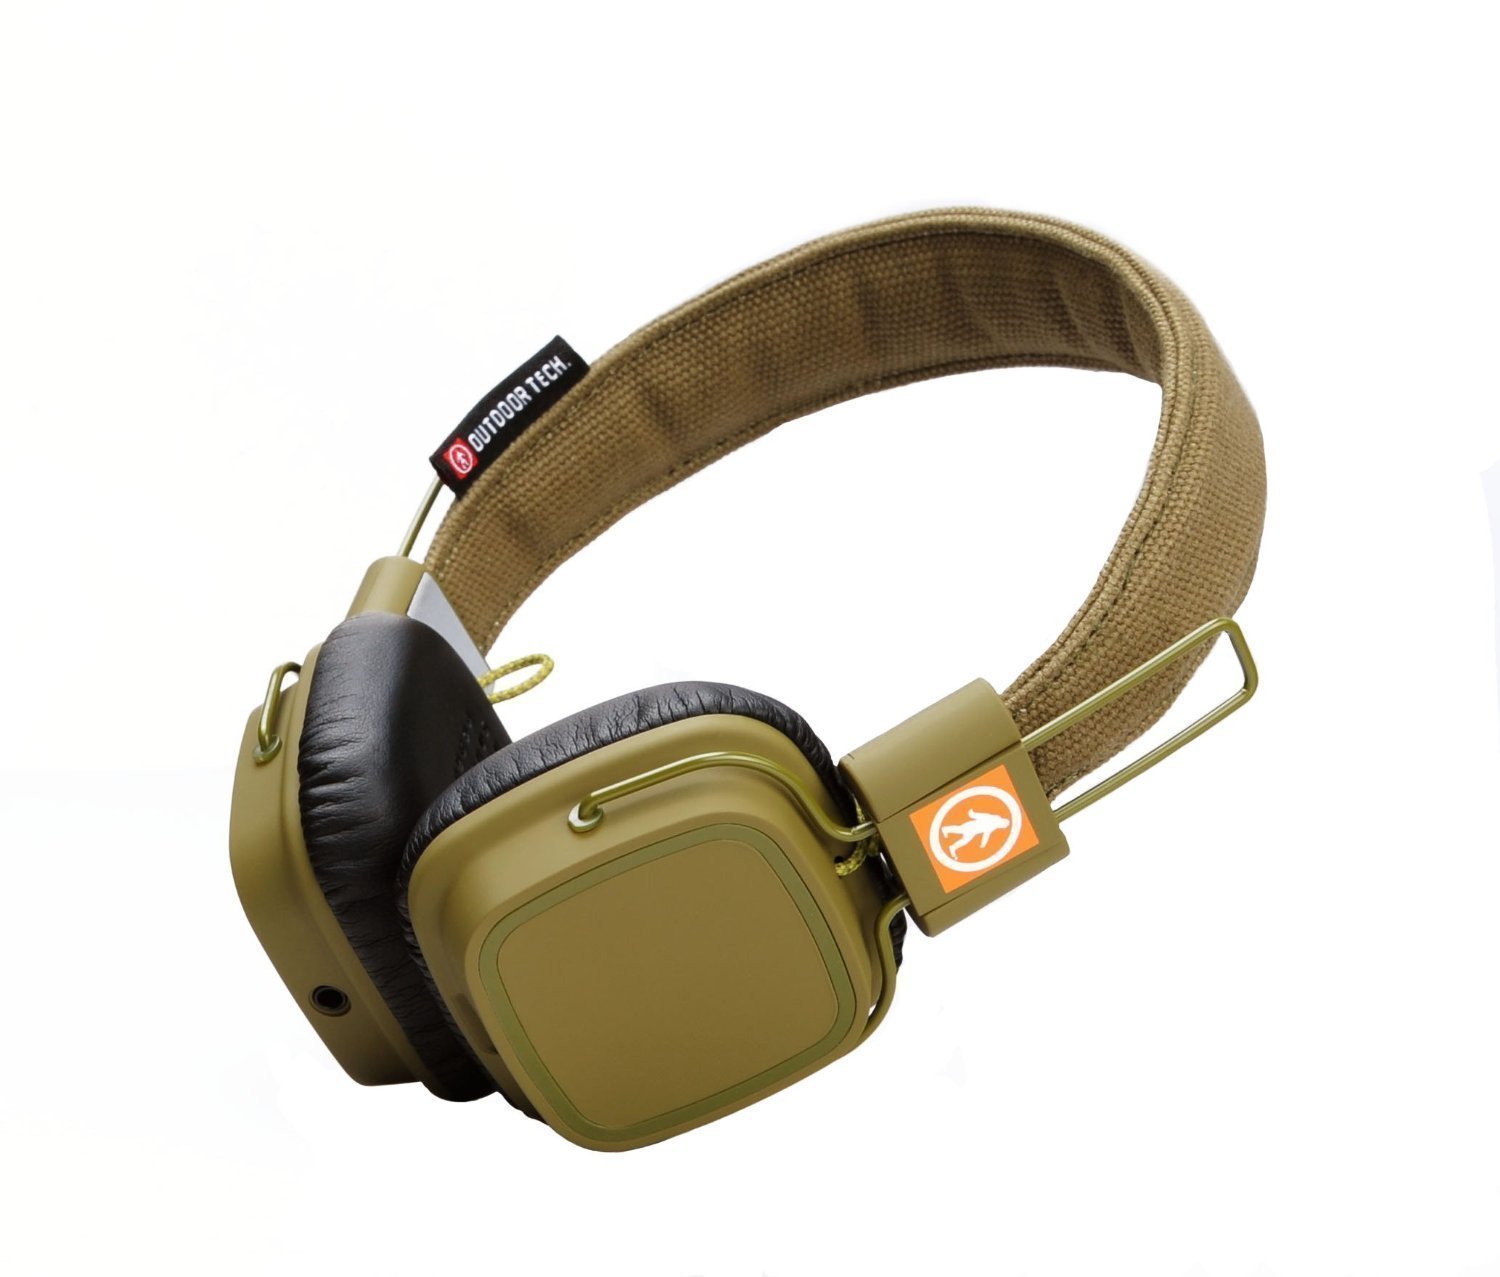 Wireless On-ear headphones Outdoor Tech Privates - Wireless Touch Control Headphones - Army Green